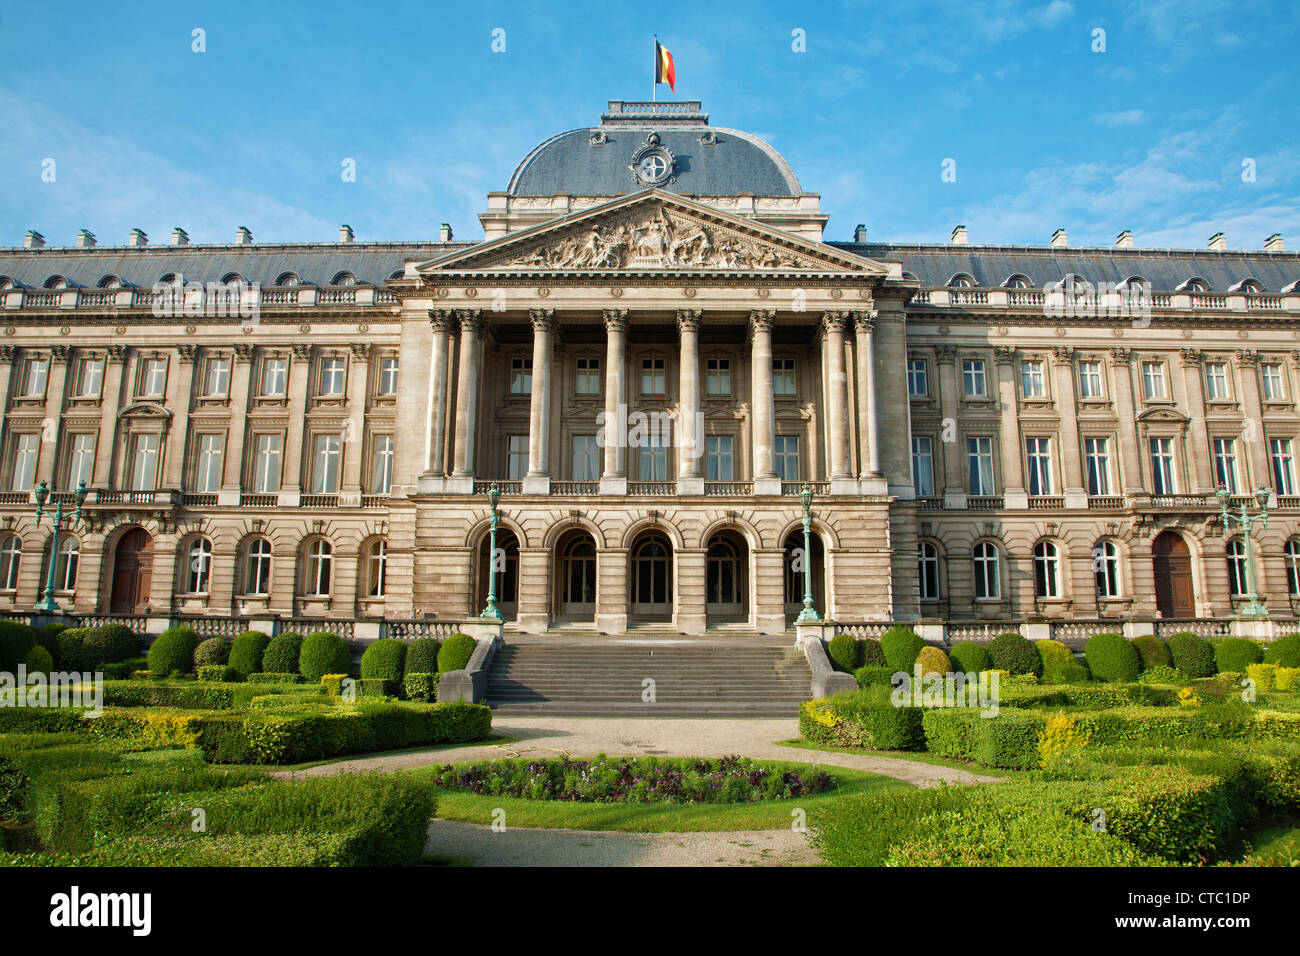 Brussels - The Royal Palace, Belgium. Stock Photo